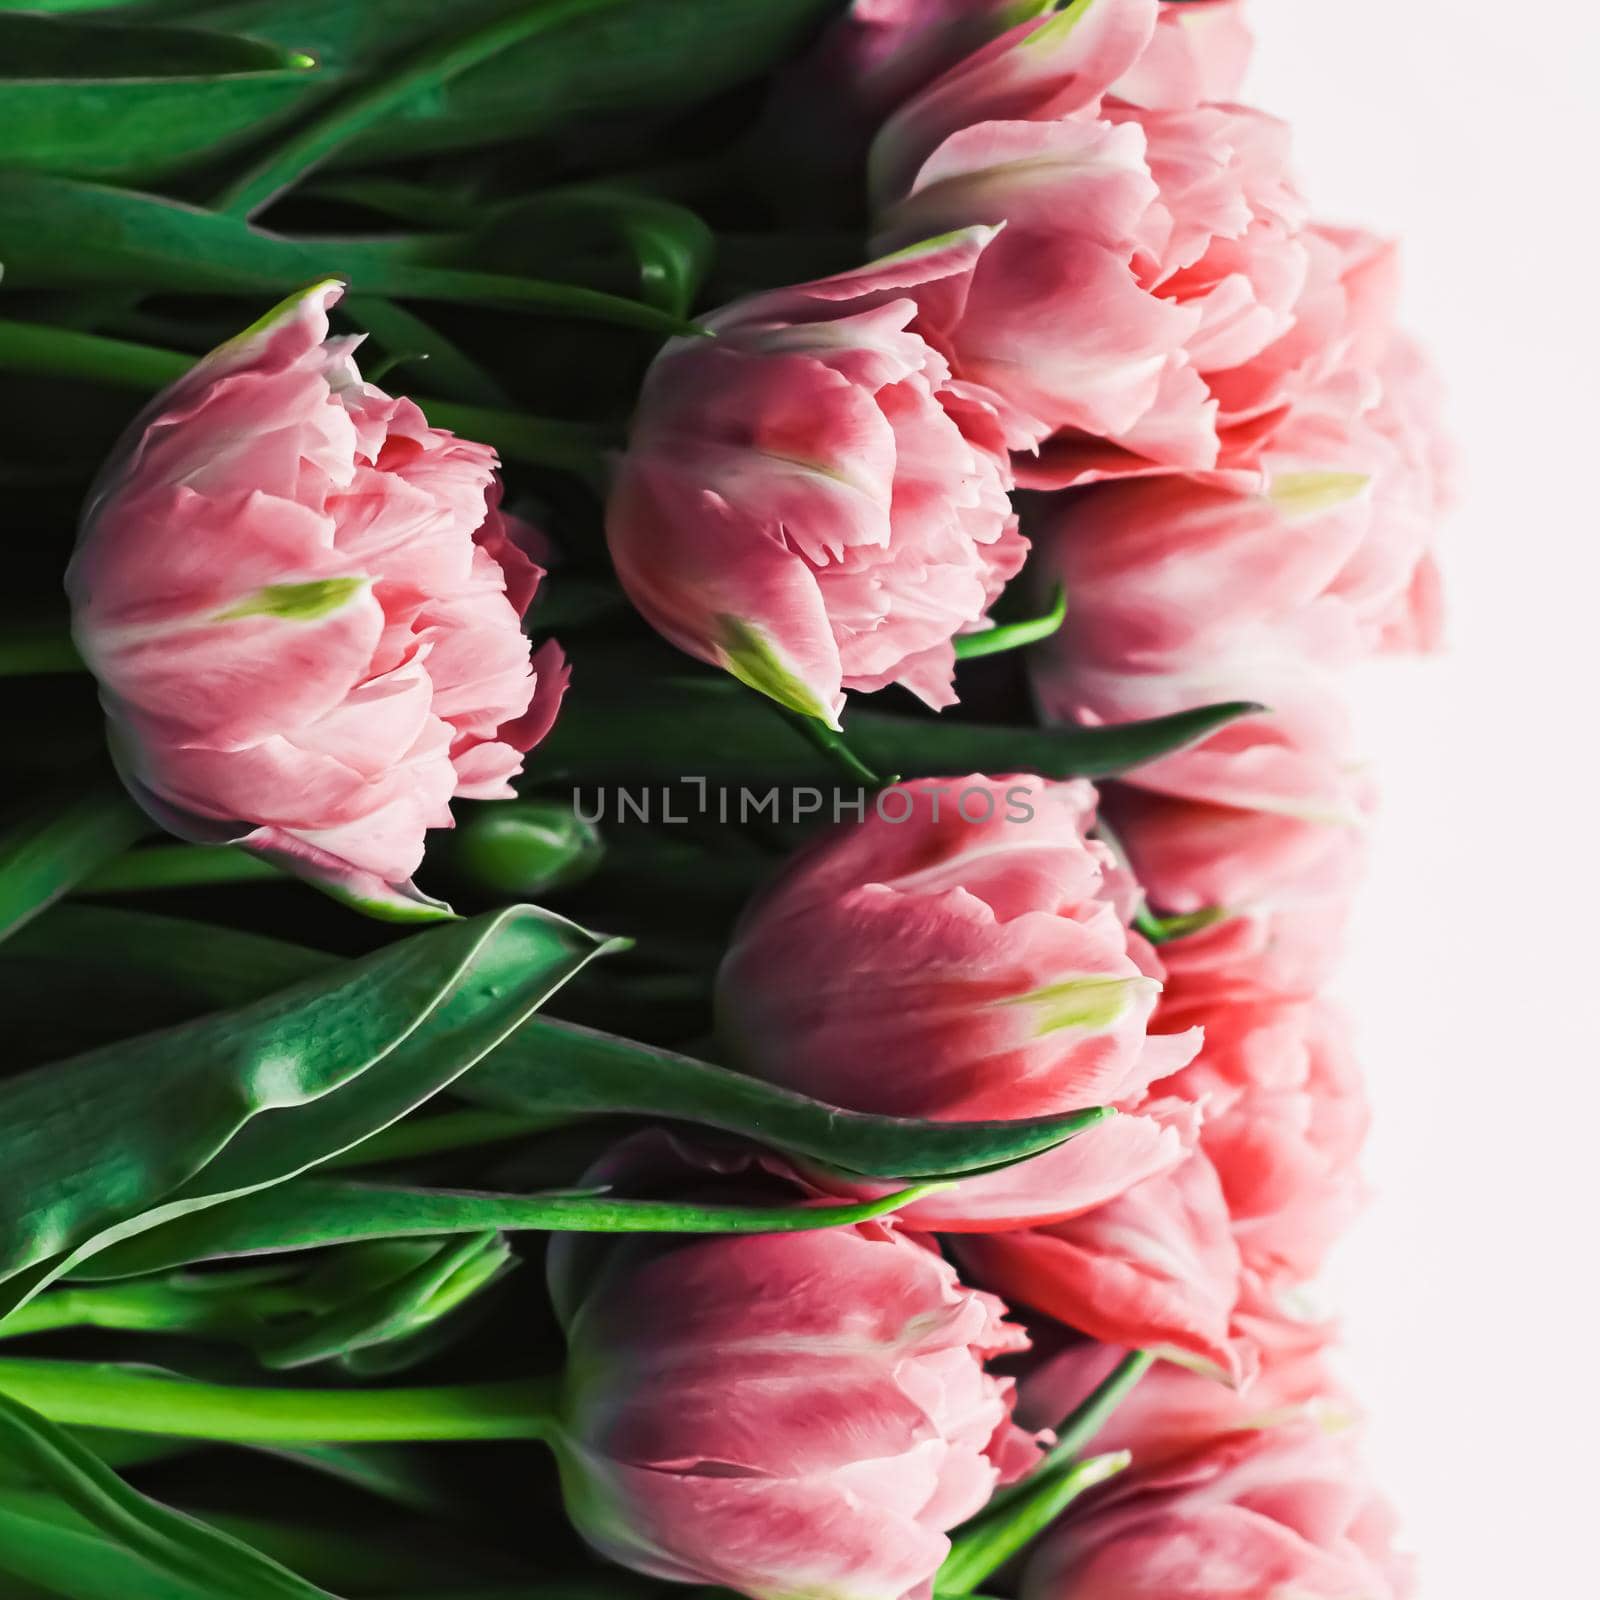 Spring flowers on marble background as holiday gift, greeting card and floral flatlay concept